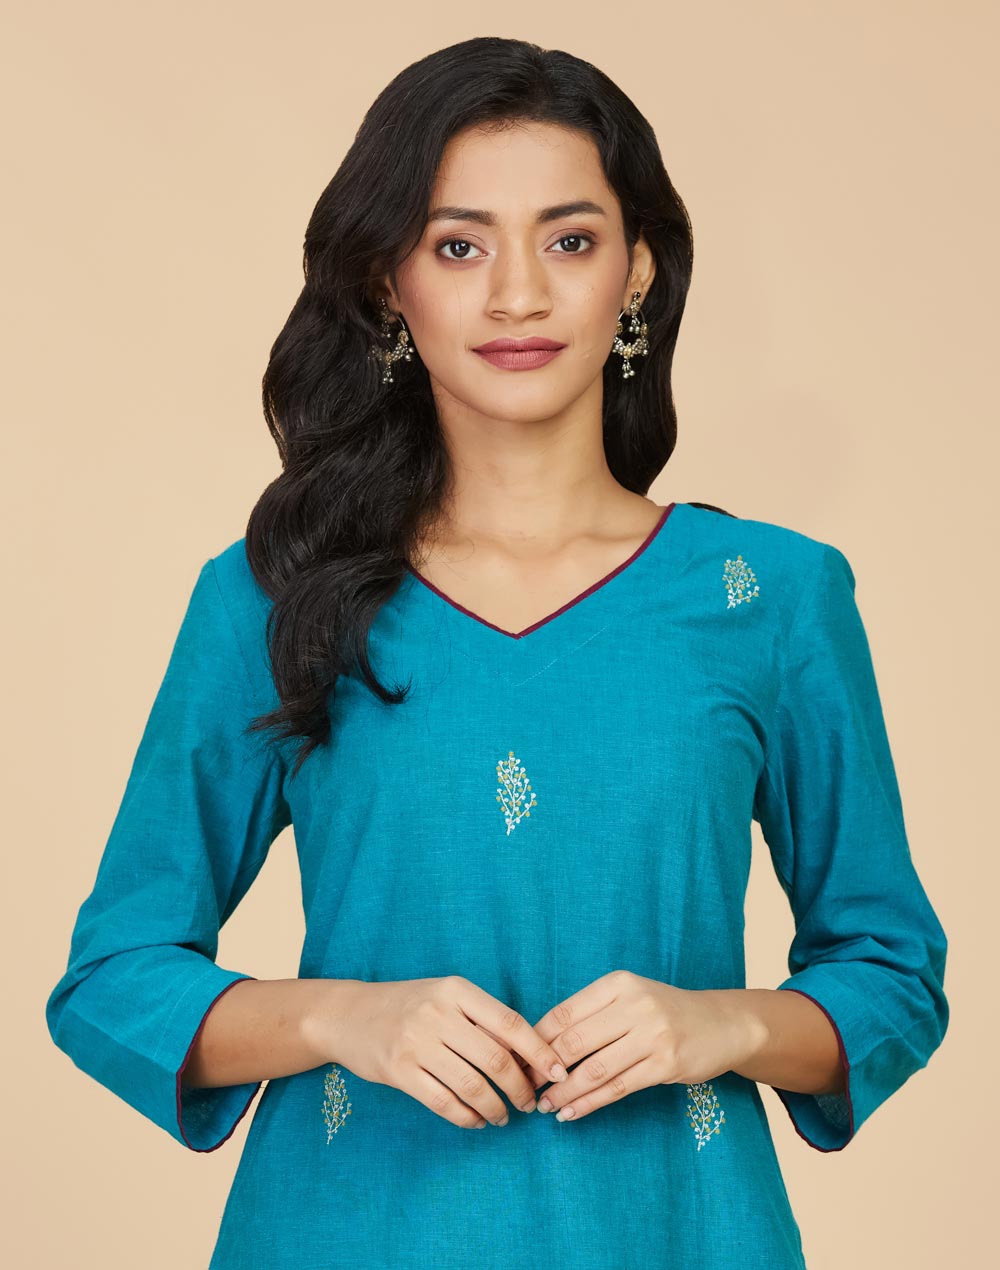 Buy Teal Cotton Embroidered Long Kurta for Women Online at Fabindia ...